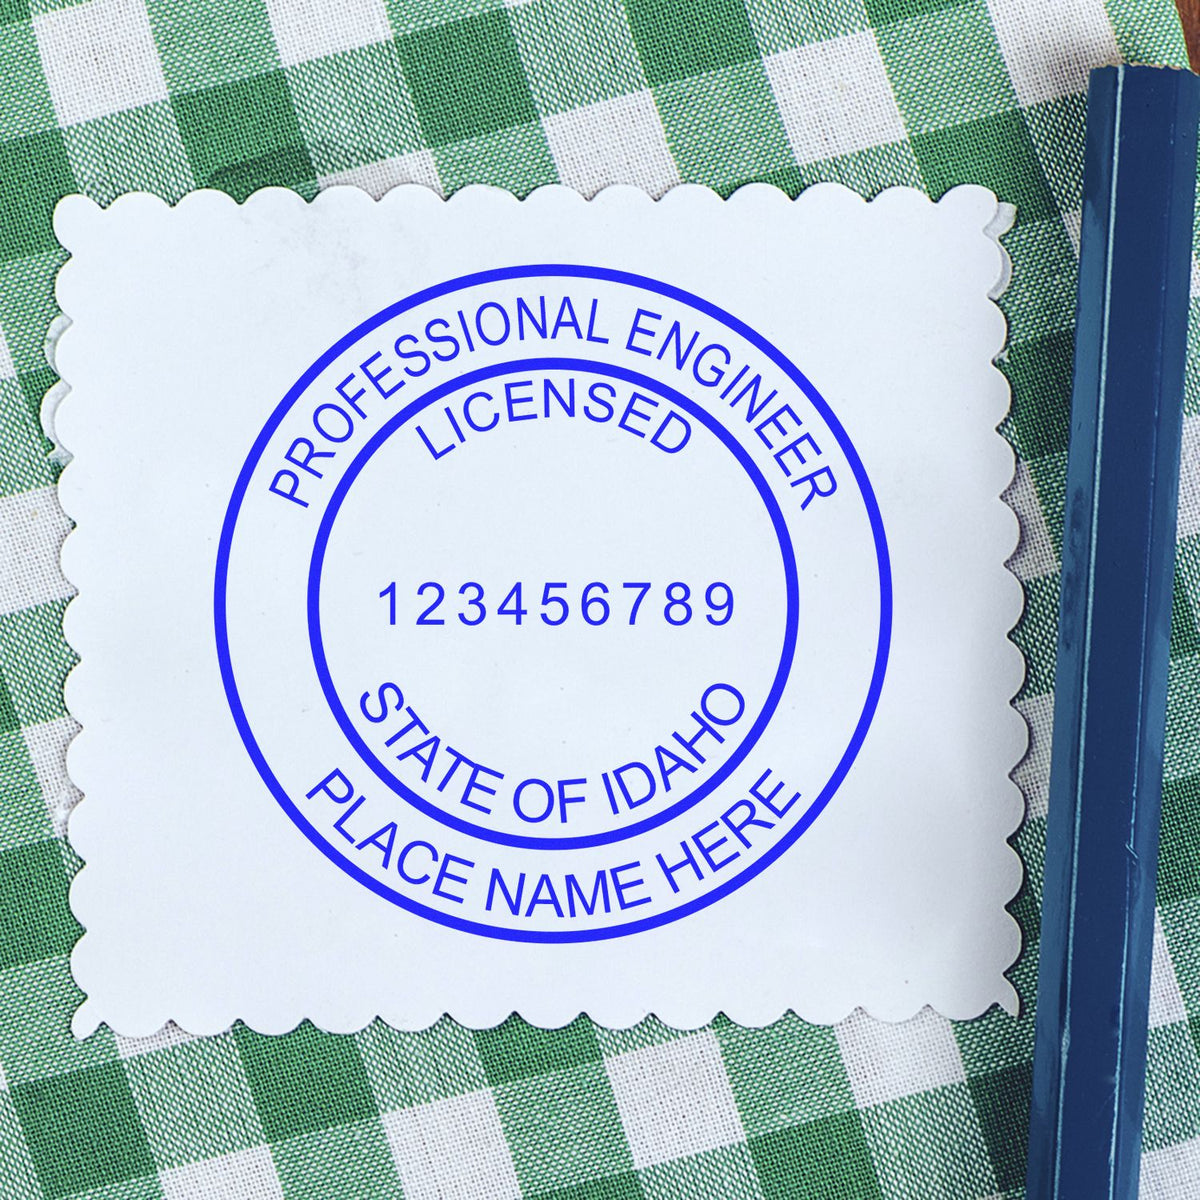 The Slim Pre-Inked Idaho Professional Engineer Seal Stamp stamp impression comes to life with a crisp, detailed photo on paper - showcasing true professional quality.